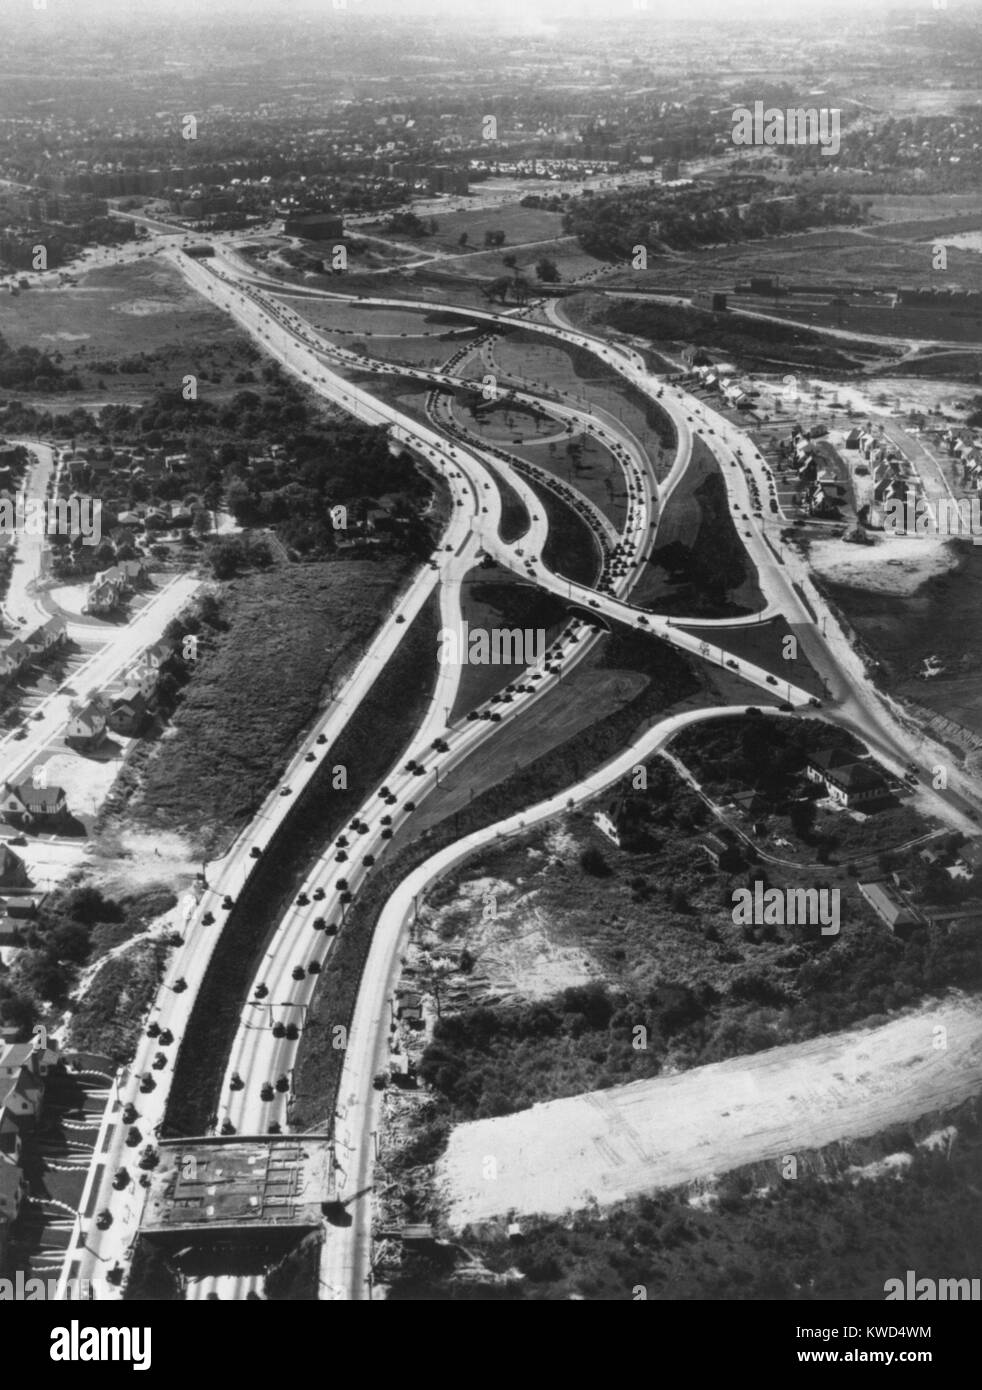 Aerial view of limited access highway on Long Island. The new roads provide access from the growing suburbs to New York City. Ca. 1946. (BSLOC_2014_13_190) Stock Photo